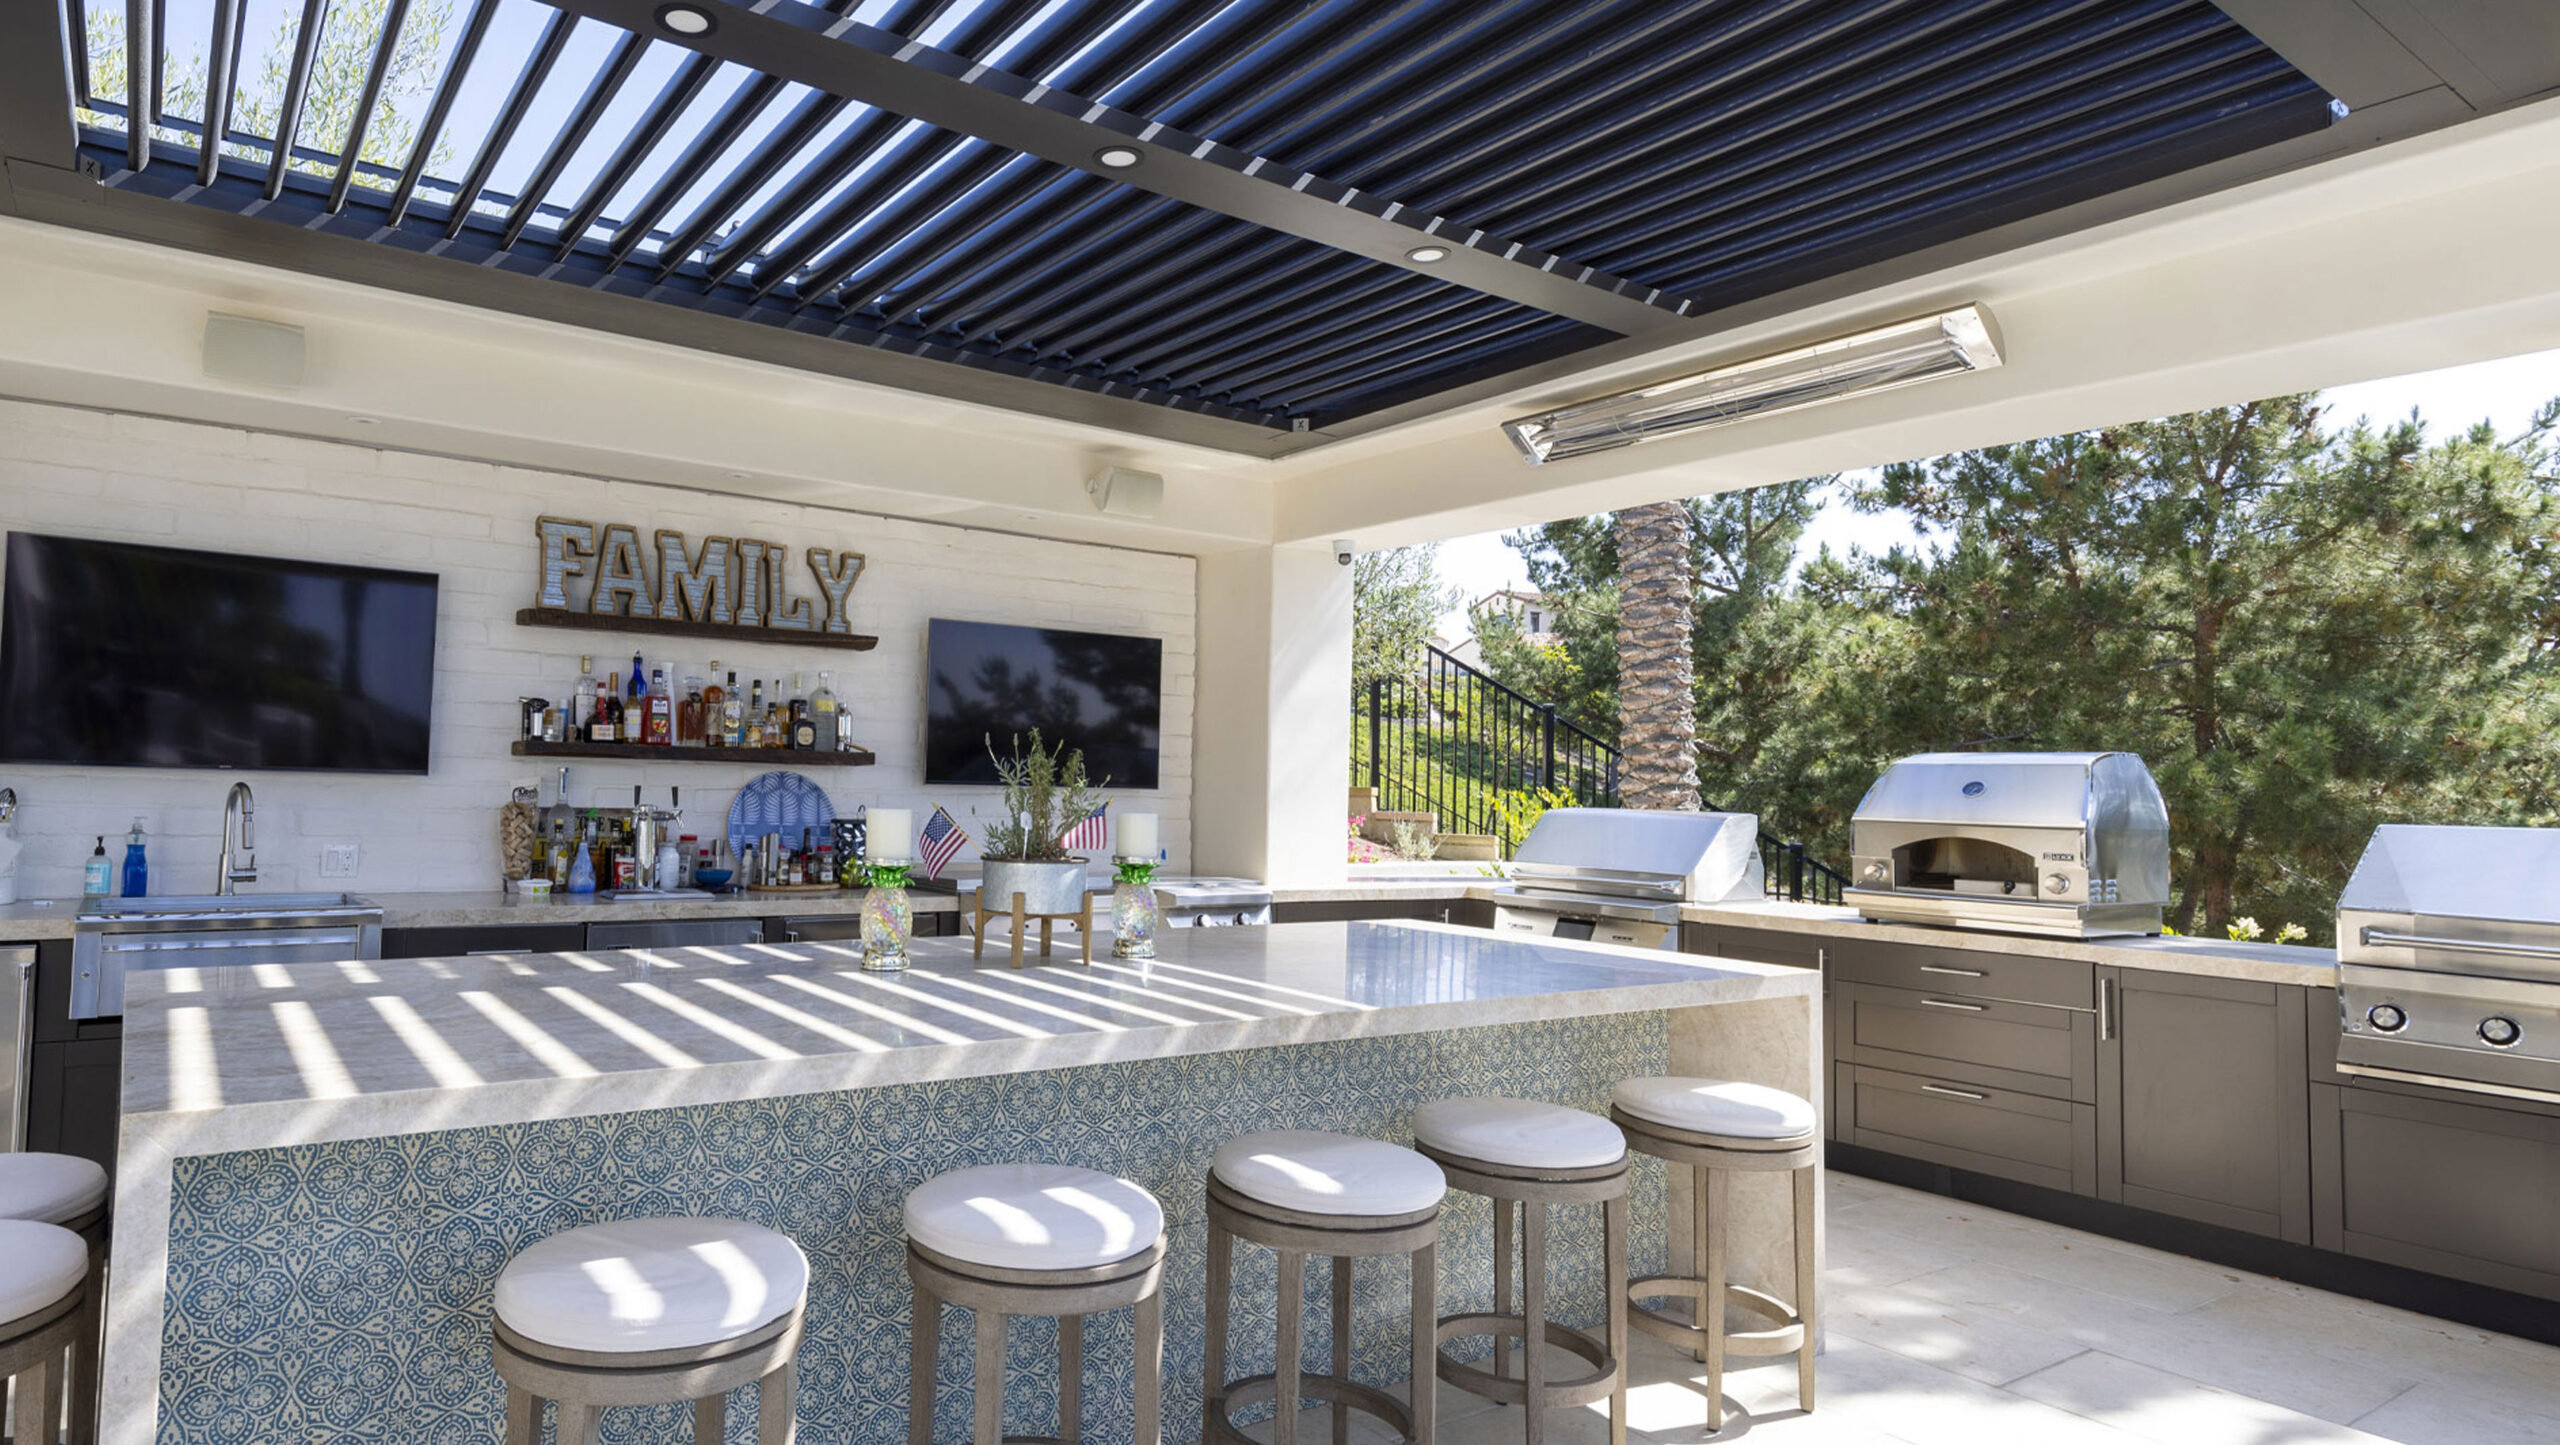 Modern outdoor kitchen with bar seating, TV, and grill under a pergola